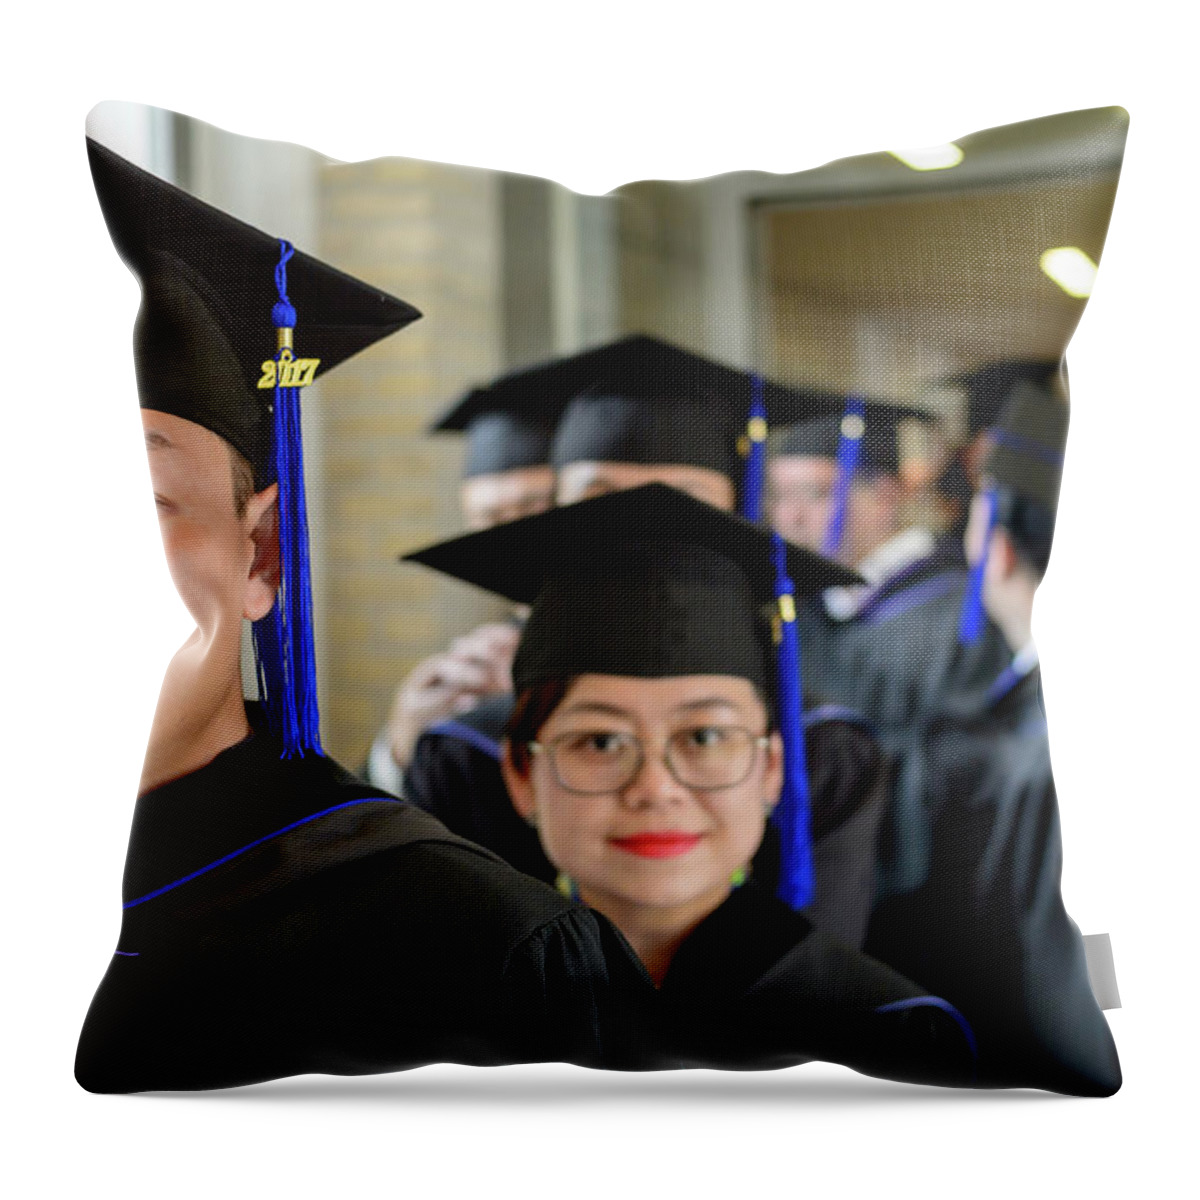  Throw Pillow featuring the photograph MSM Graduation Ceremony 2017 #46 by Maastricht School Of Management